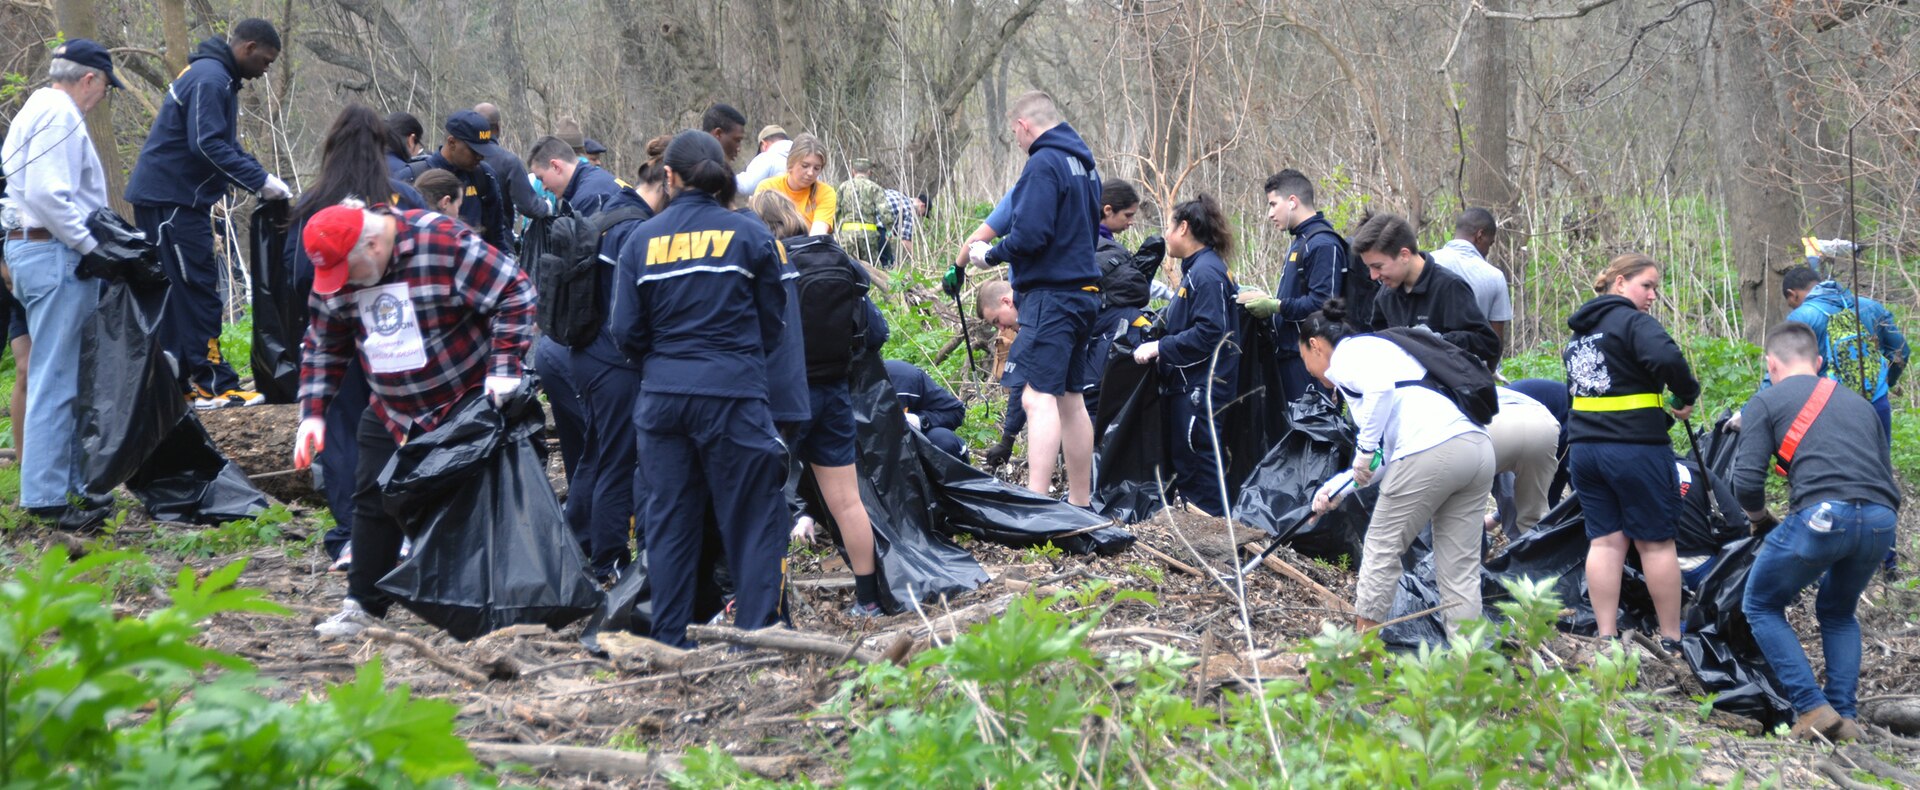 It was definitely a joint service effort Feb. 16, 2019, as hundreds of Soldiers, Sailors and Airmen were all in to help clean out thousands of pounds of trash from an important waterway which runs through JBSA-Fort Sam Houston, working throughout the morning to clear out a year's worth of accumulated debris.